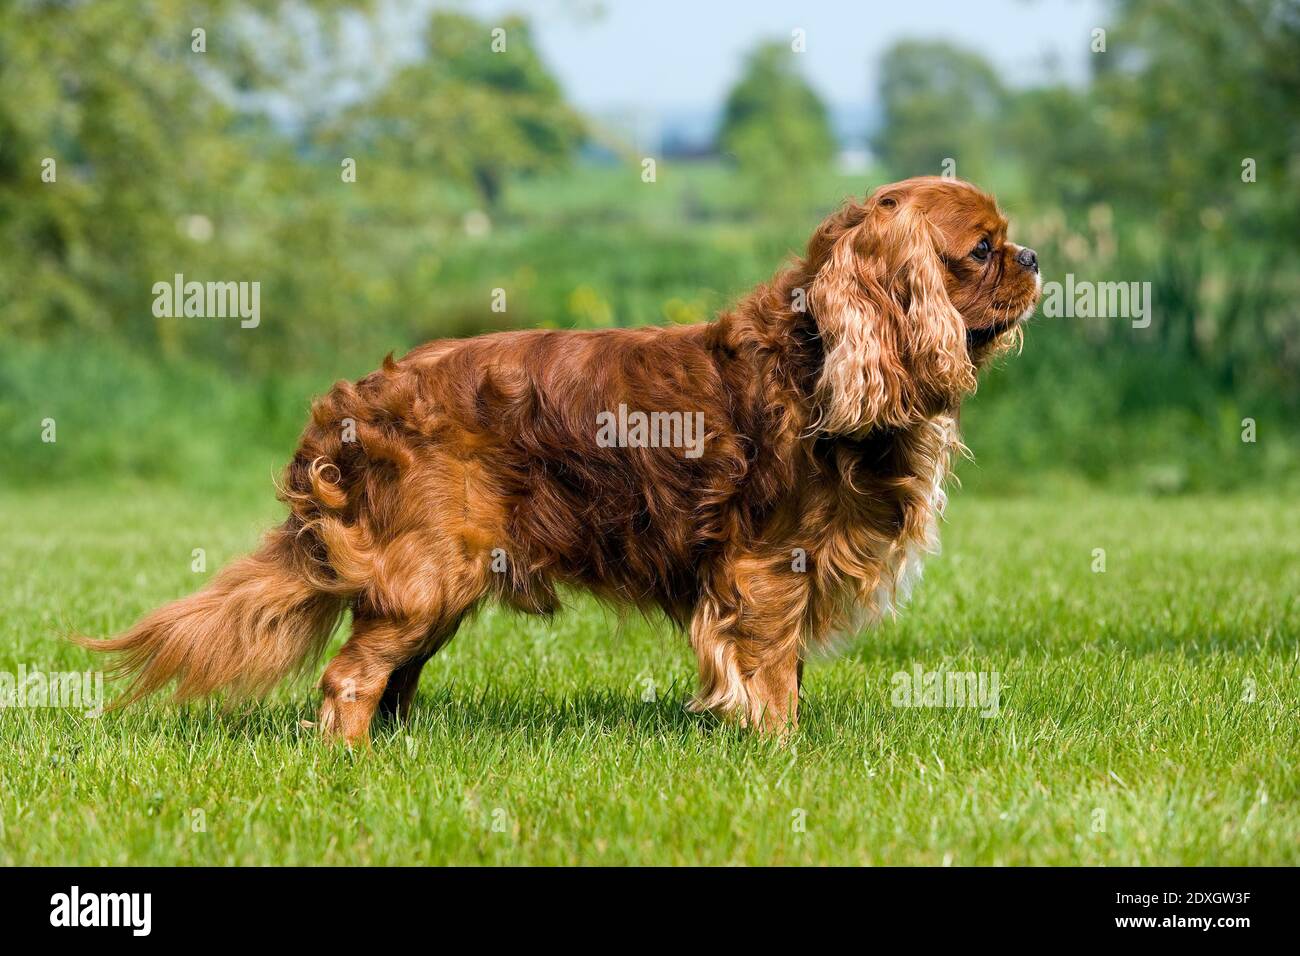 Cavalier King Charles Spaniel, Male standing on Lawn Stock Photo